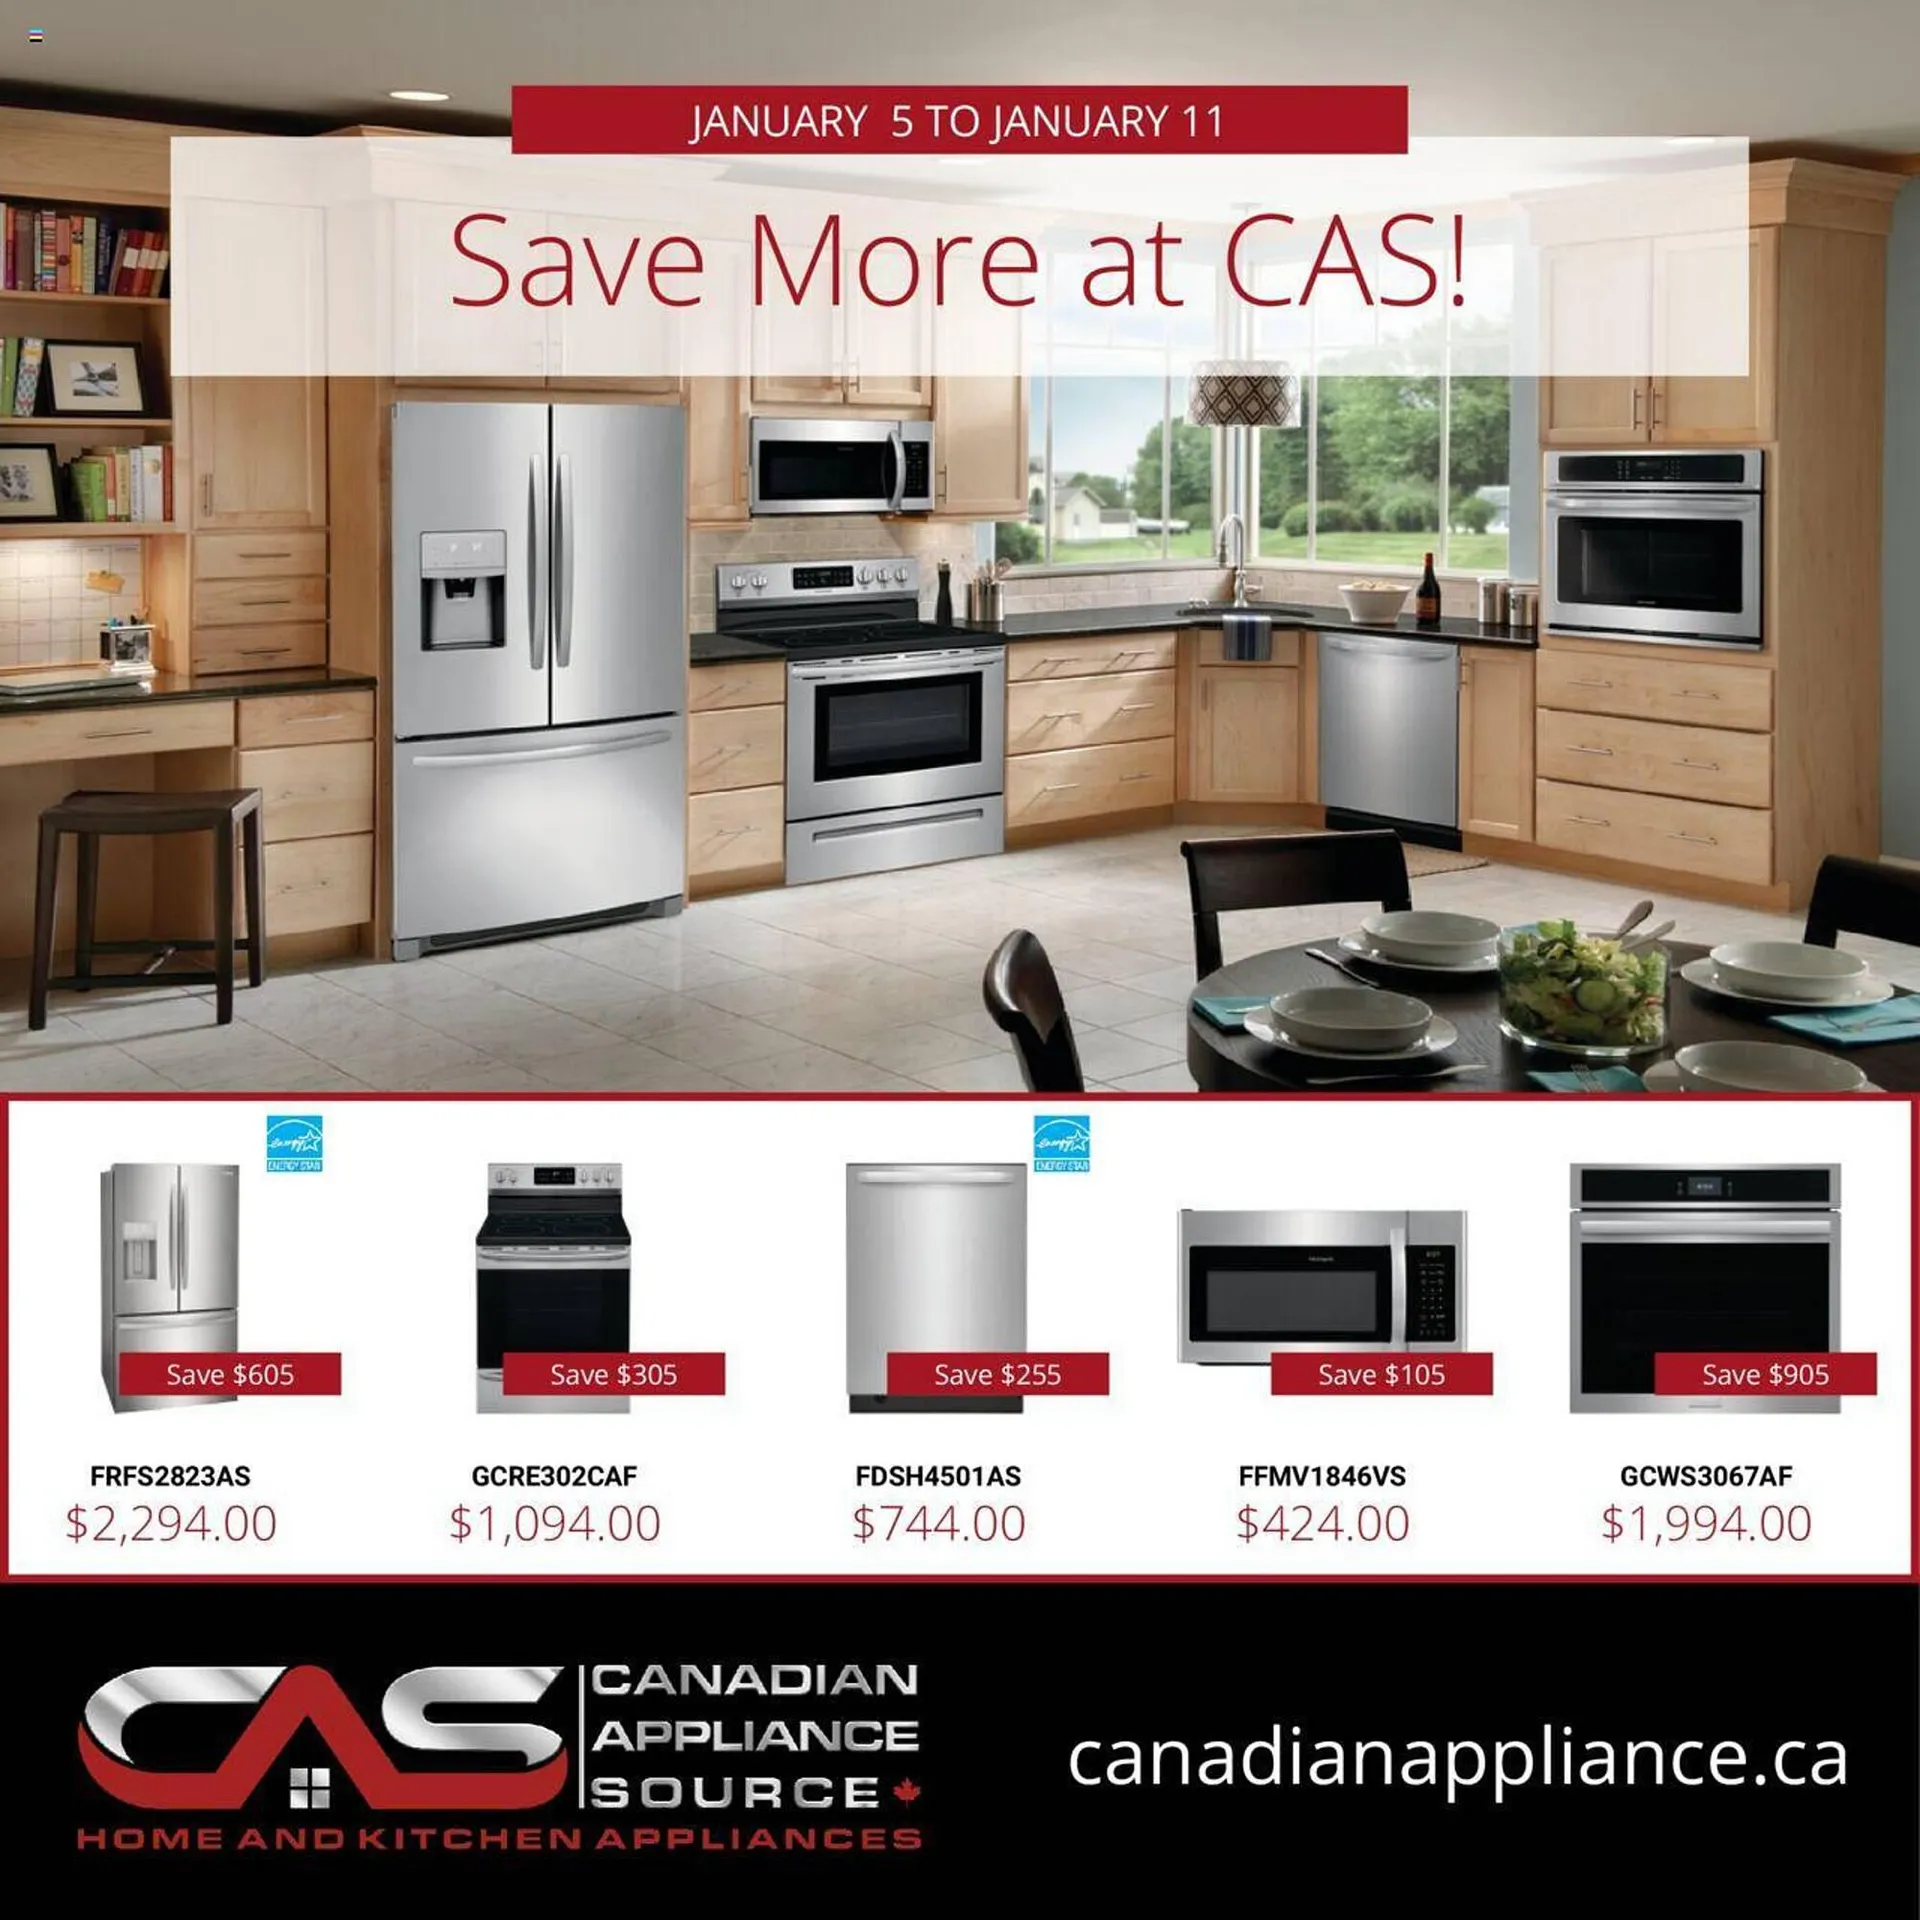 Canadian Appliance Source flyer - 1